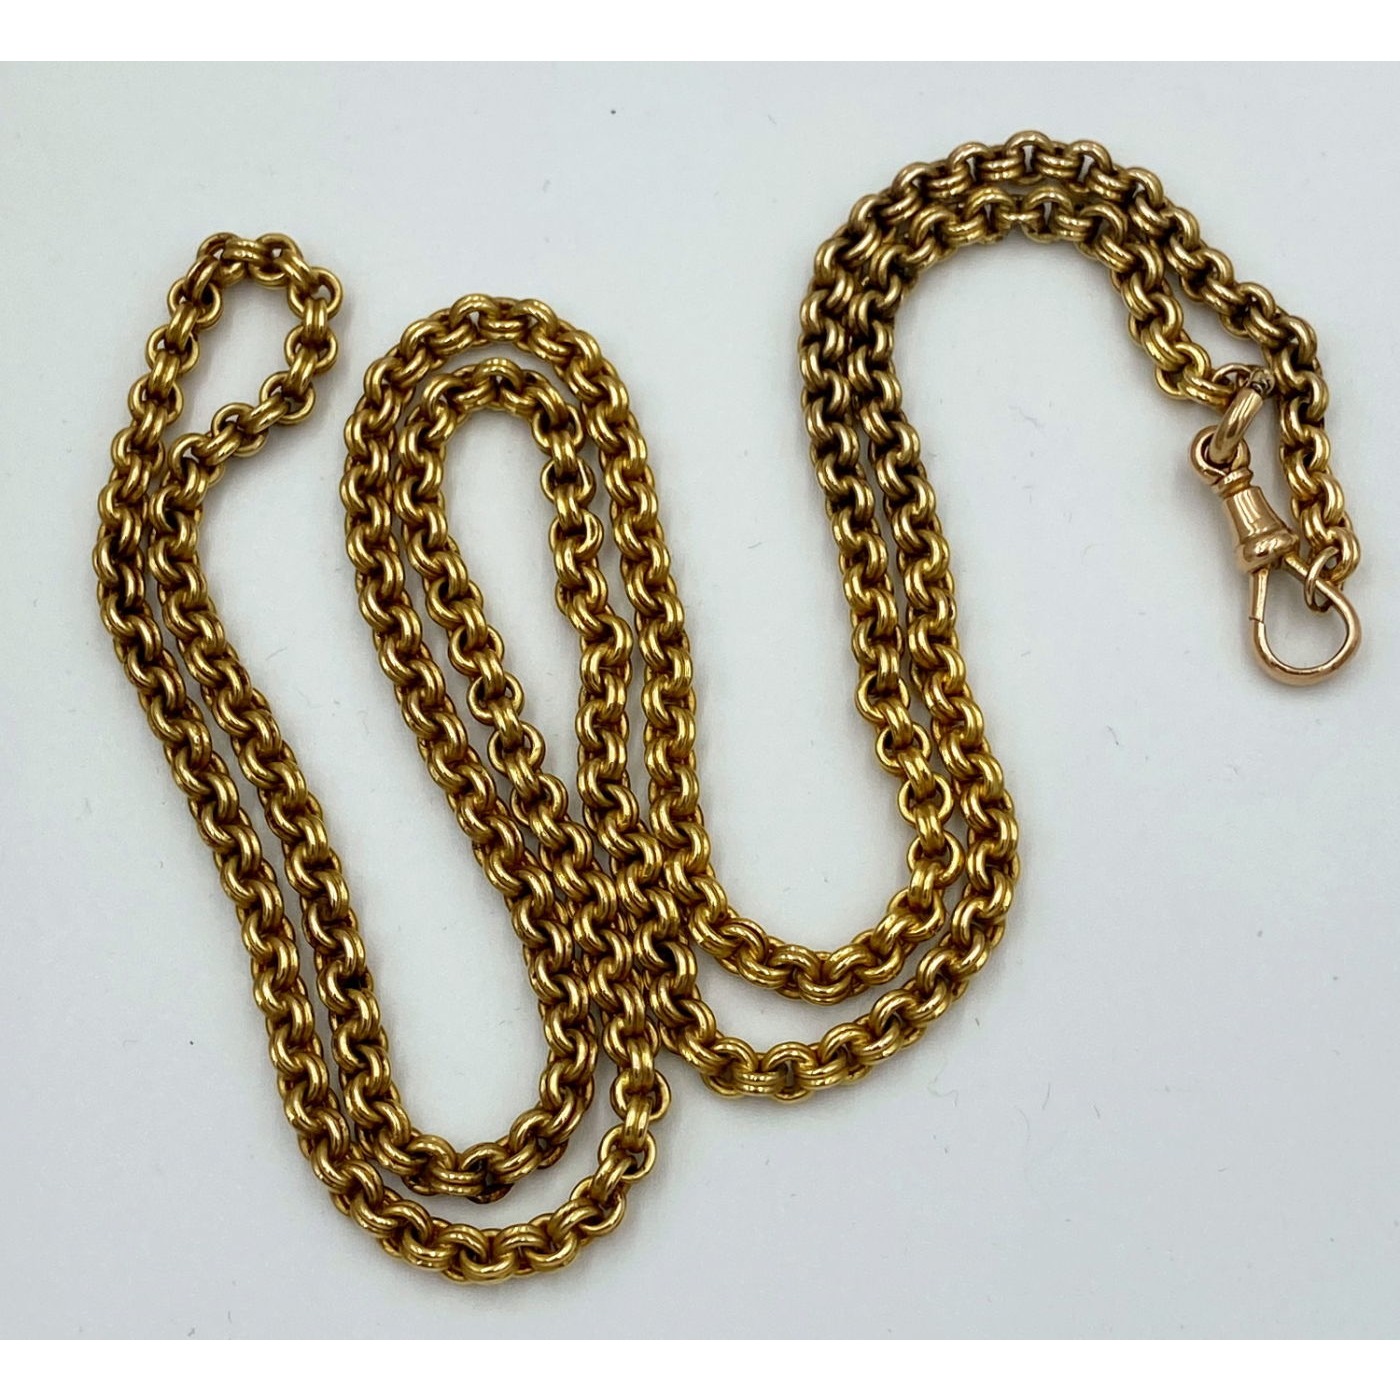 Luscious 30" 15 karat Gold Tightly Woven Rolo Link English Watch Chain